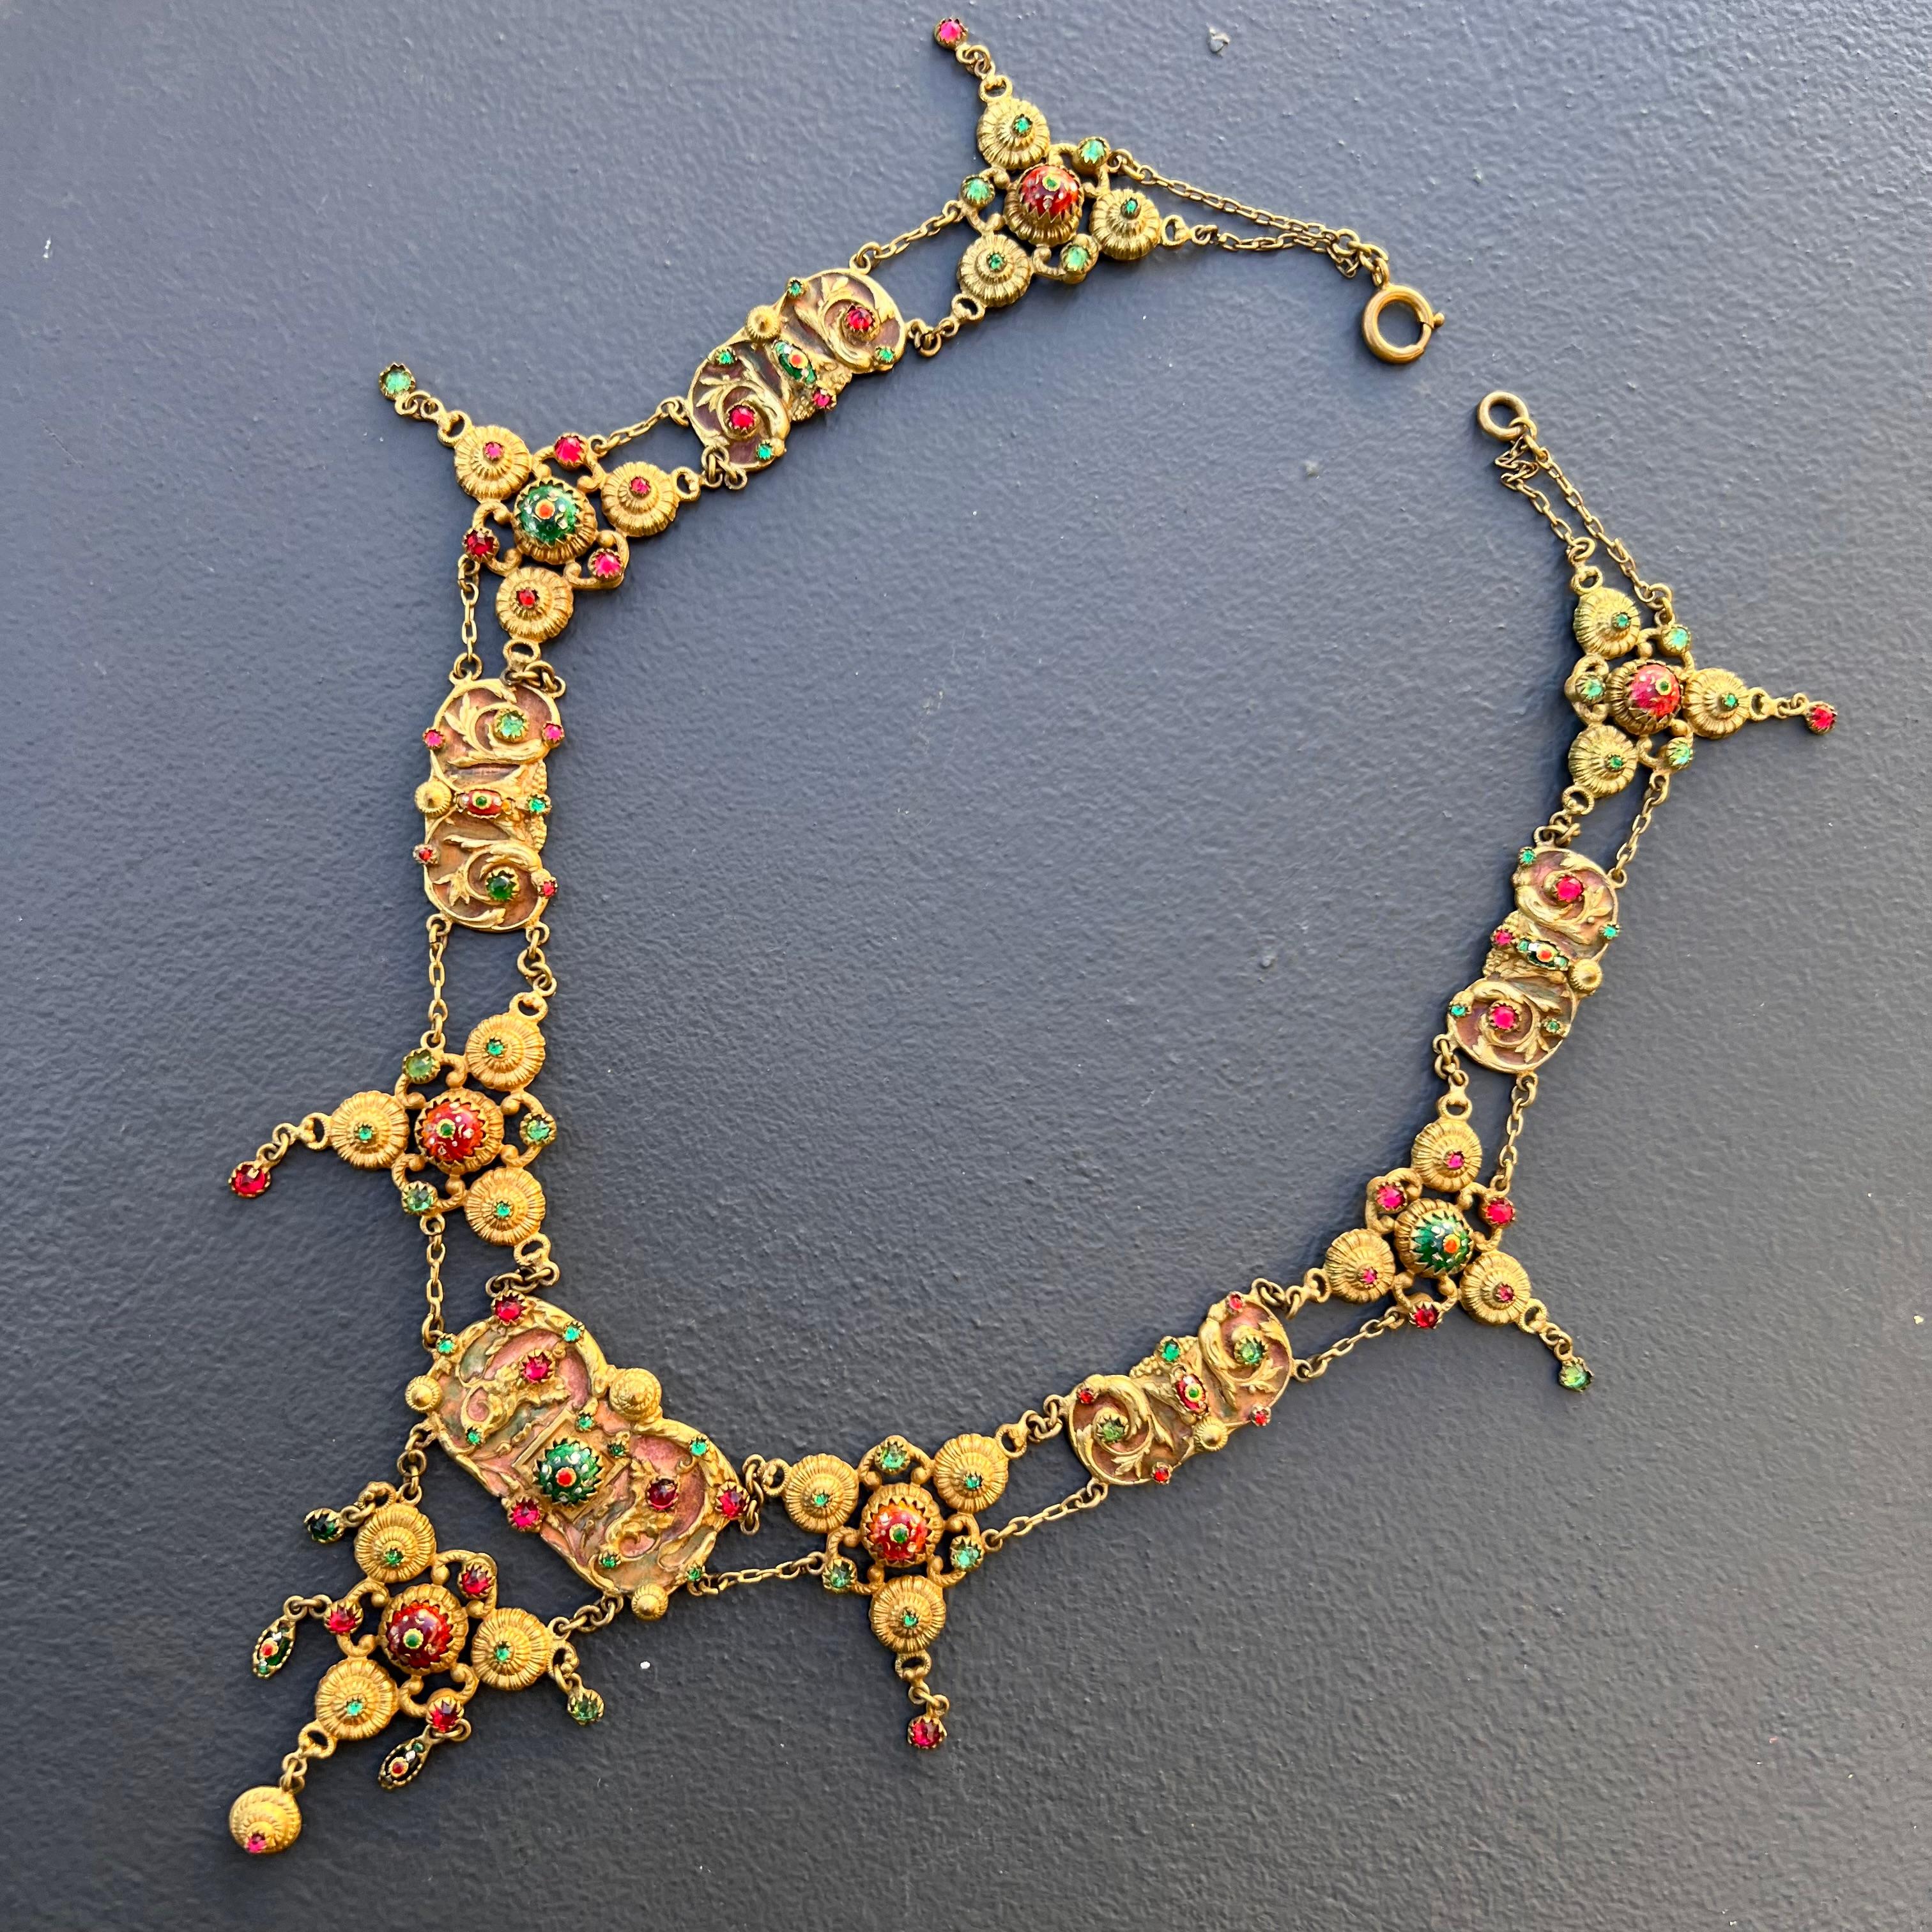 Collectible Antique French festoon Necklace with foiled glass paste stones and bresse enamel cabs set on an ornate gold gilded brass panels with light enamel work .
 Bresse enamel or emaux enamel has a distinctive beauty ,it used to be done in a